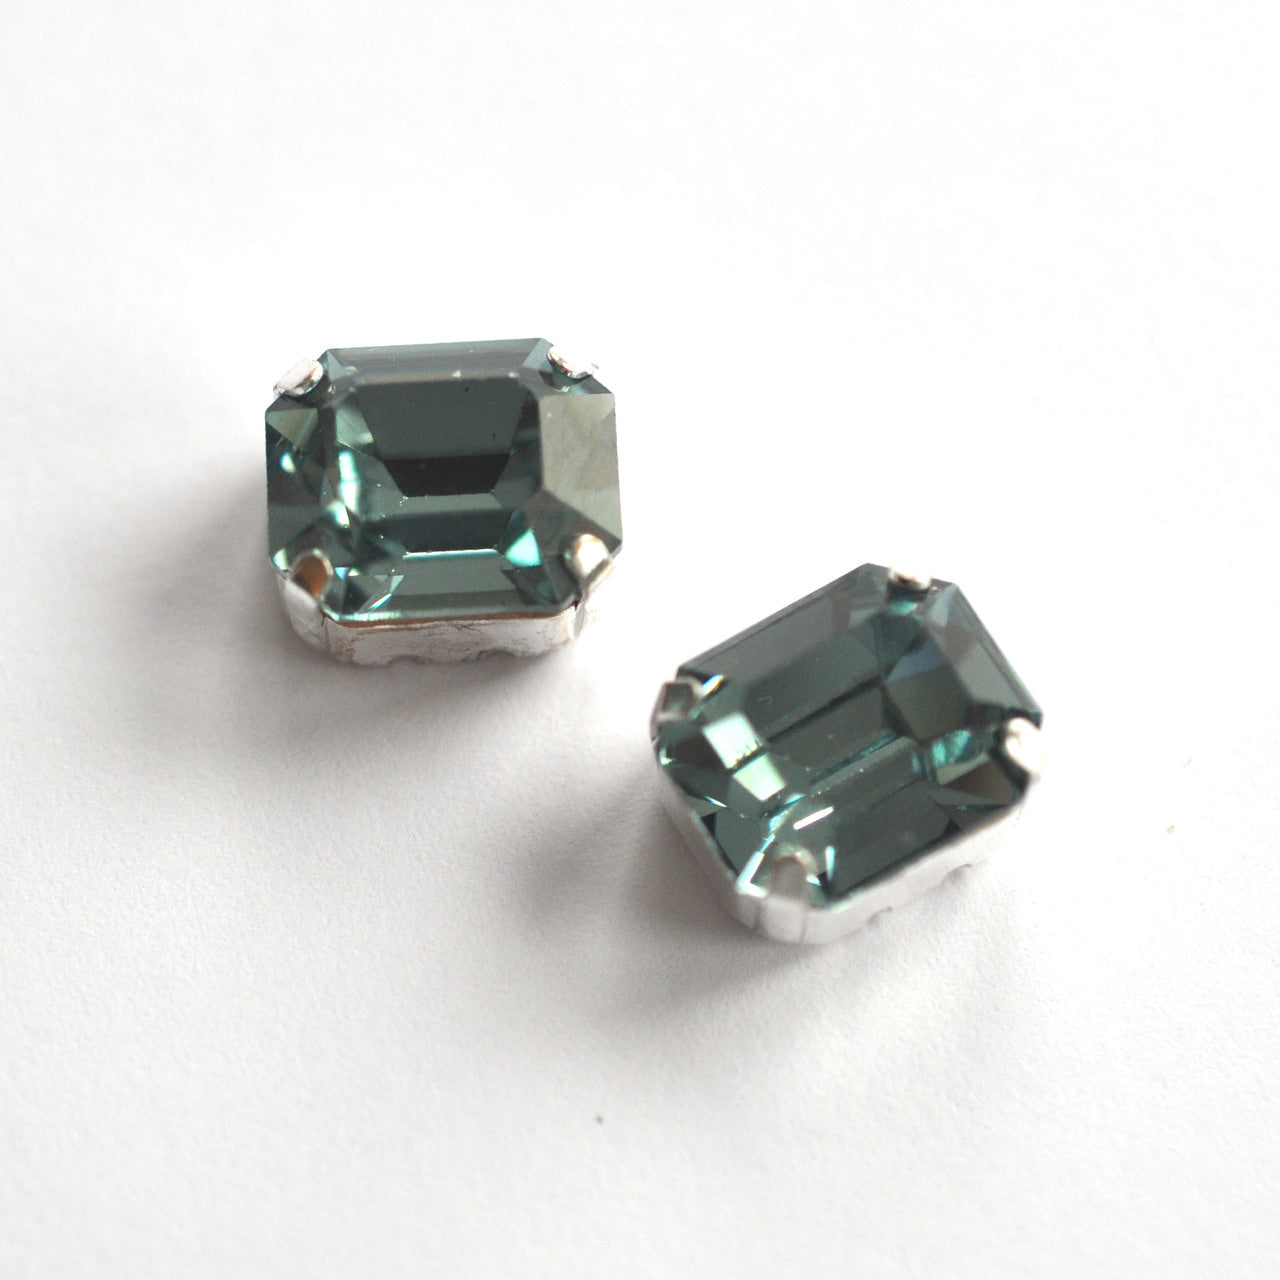 Indian Sapphire 12x10mm Octagon Sew On Crystals - 2 Pieces